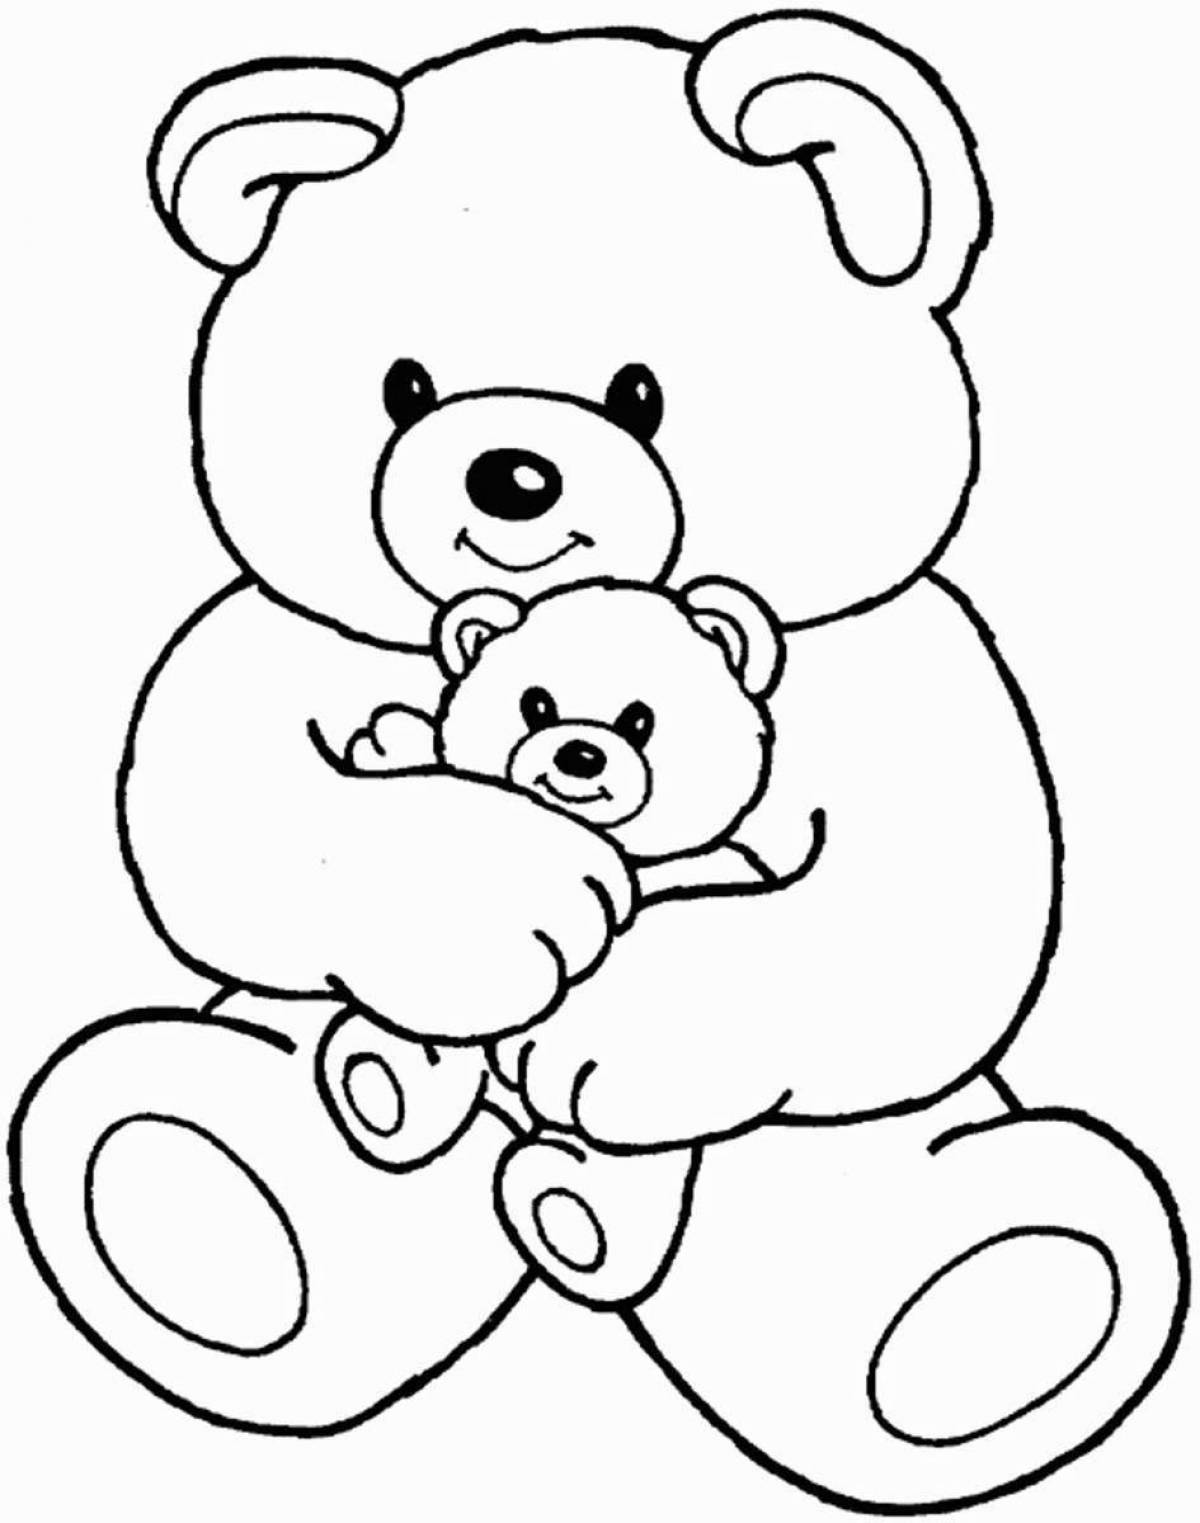 Glittering teddy bear coloring page